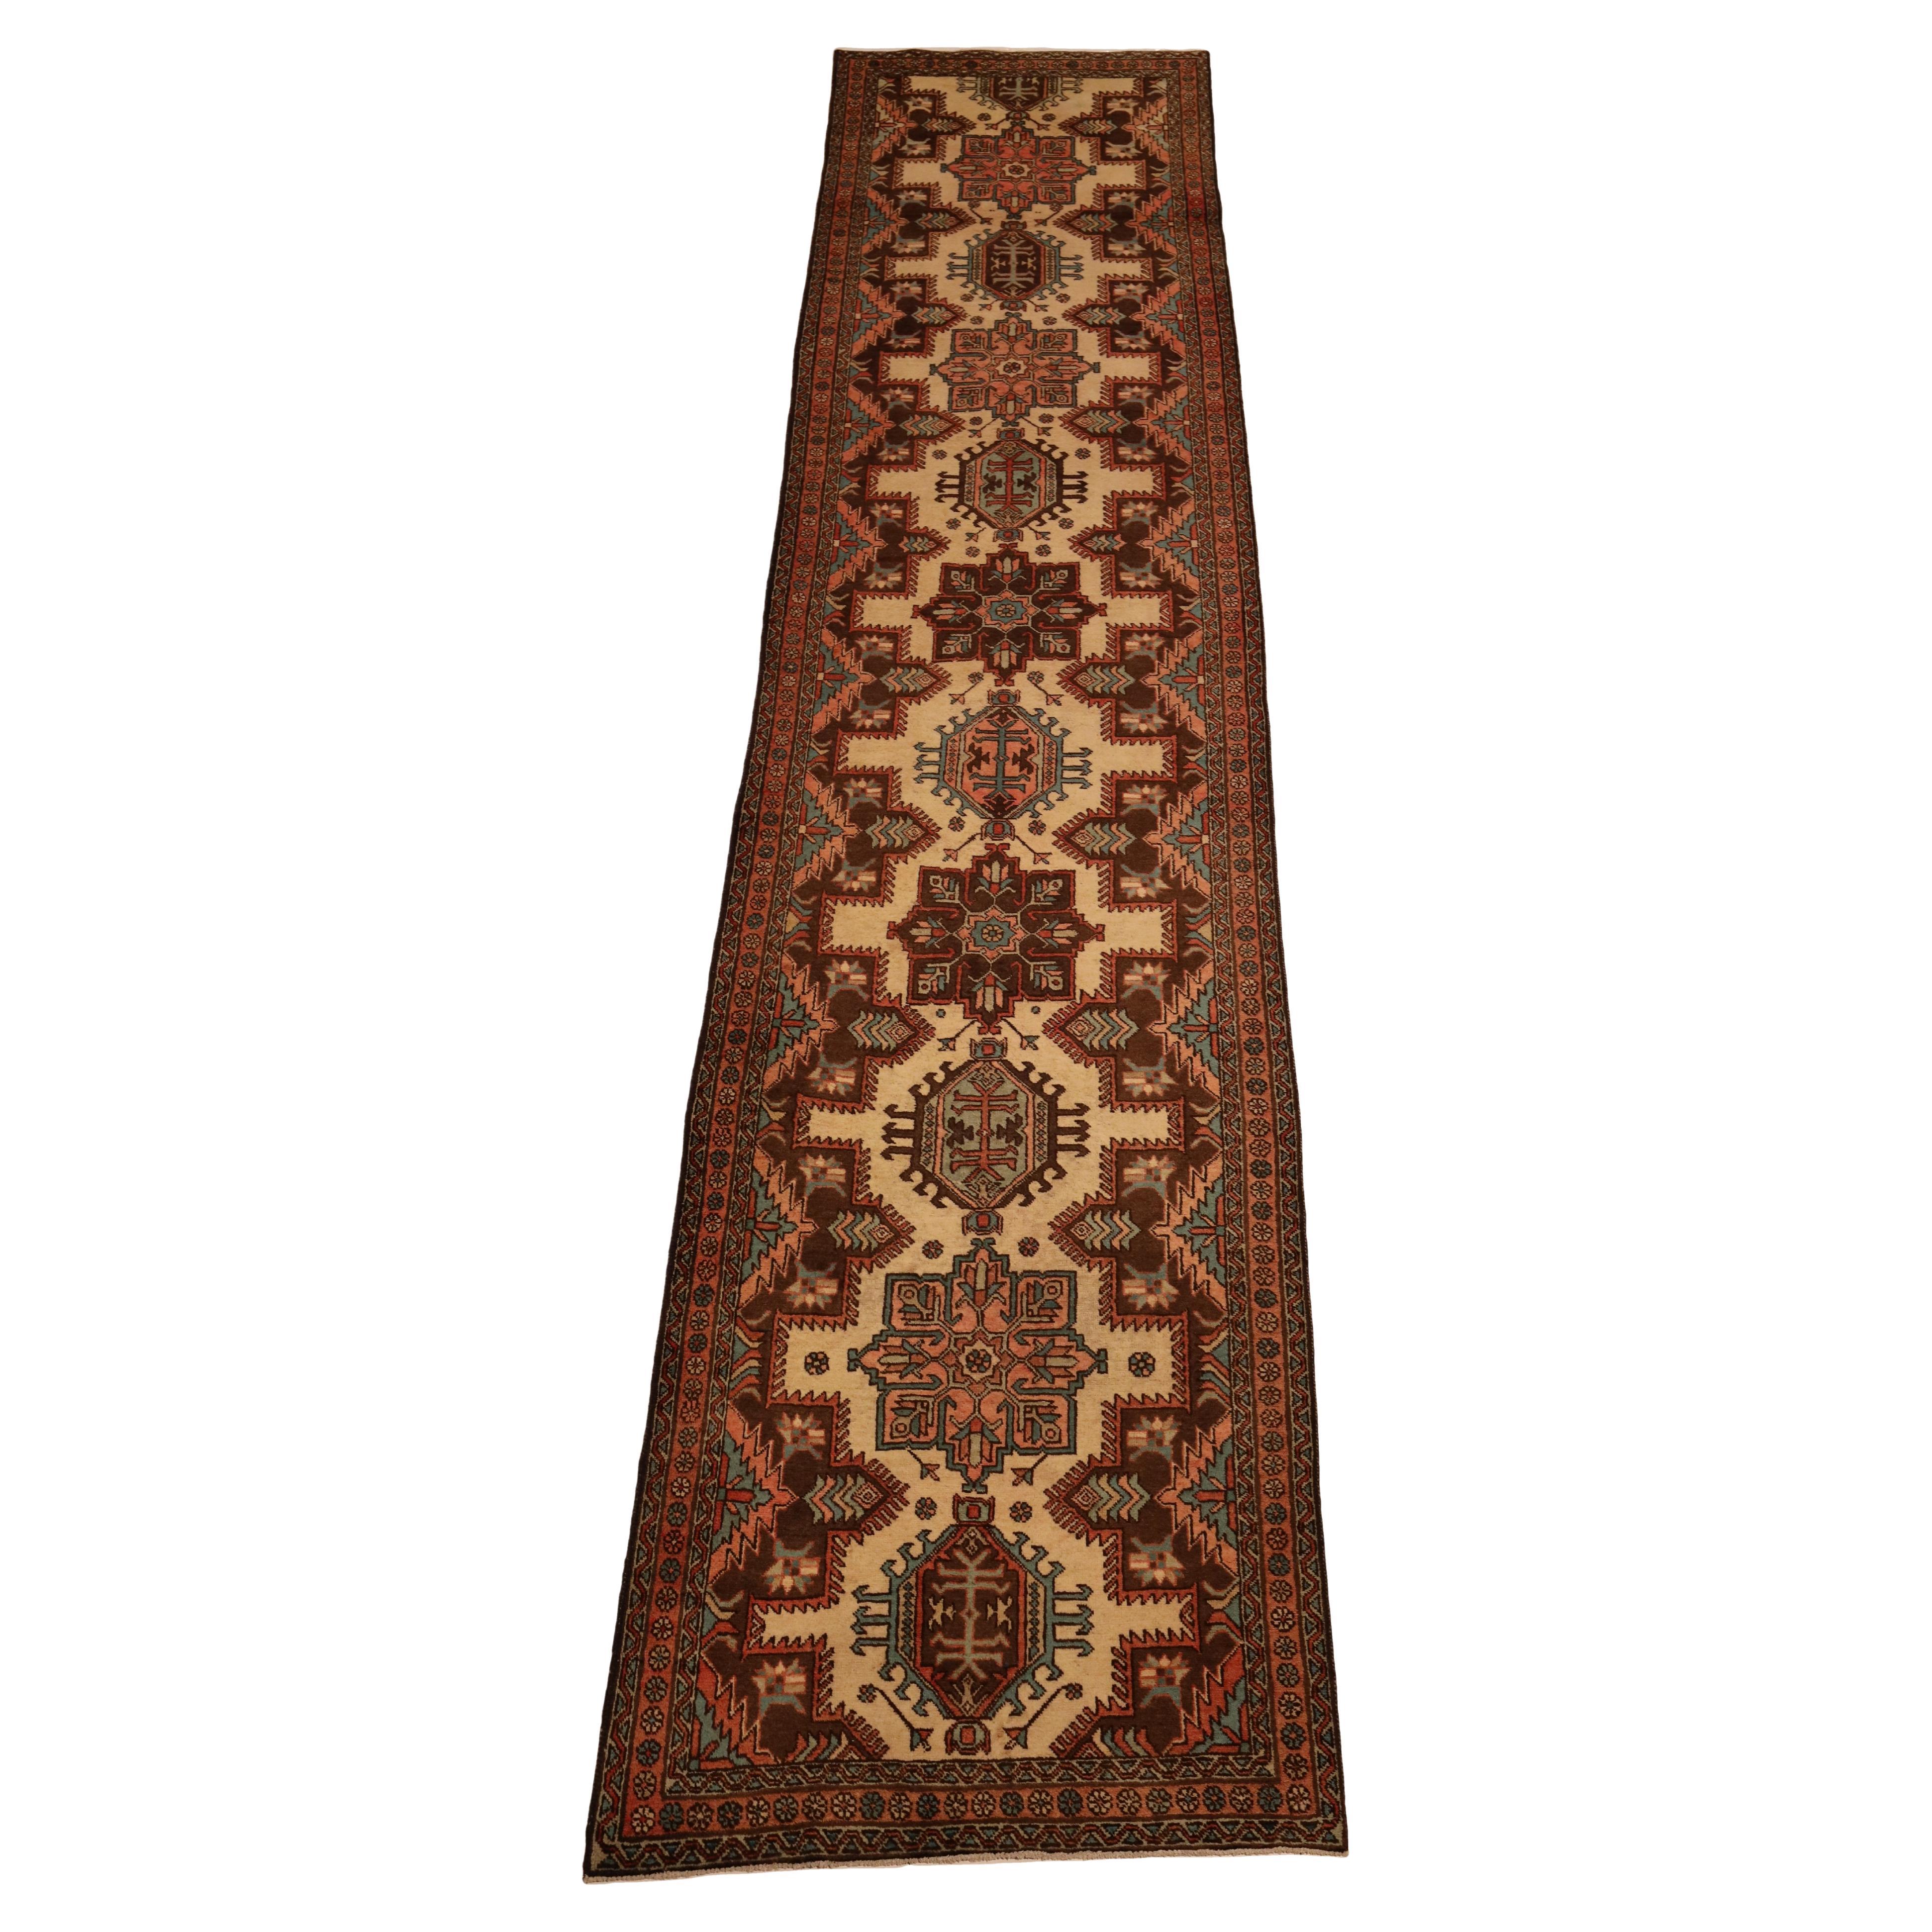 North-West Persian Antique Runner - 3'3" x 14'4" For Sale